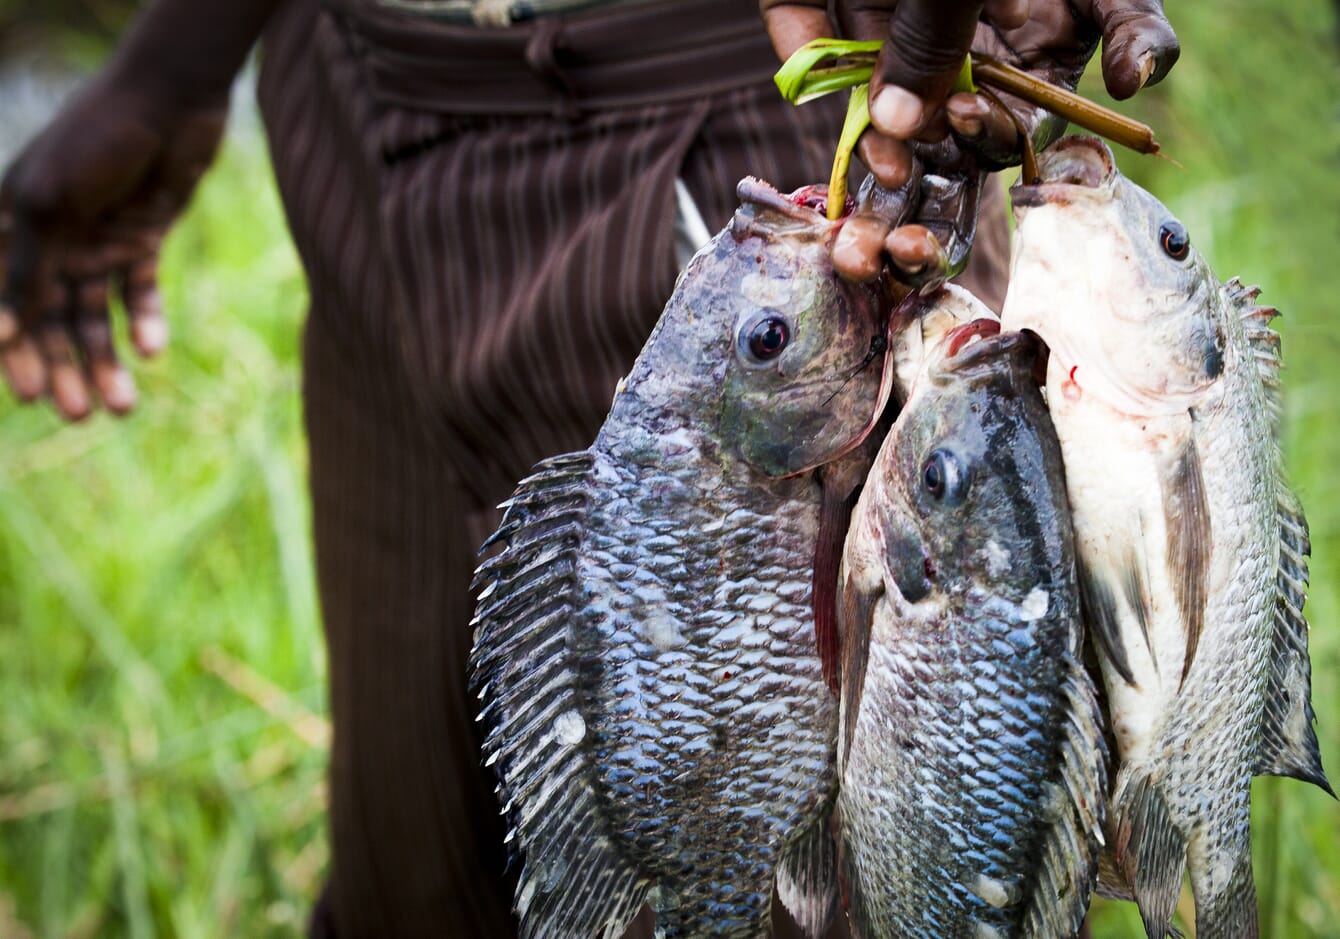 Invasive to innovative: coping with water hyacinth and Nile perch in Lake  Victoria